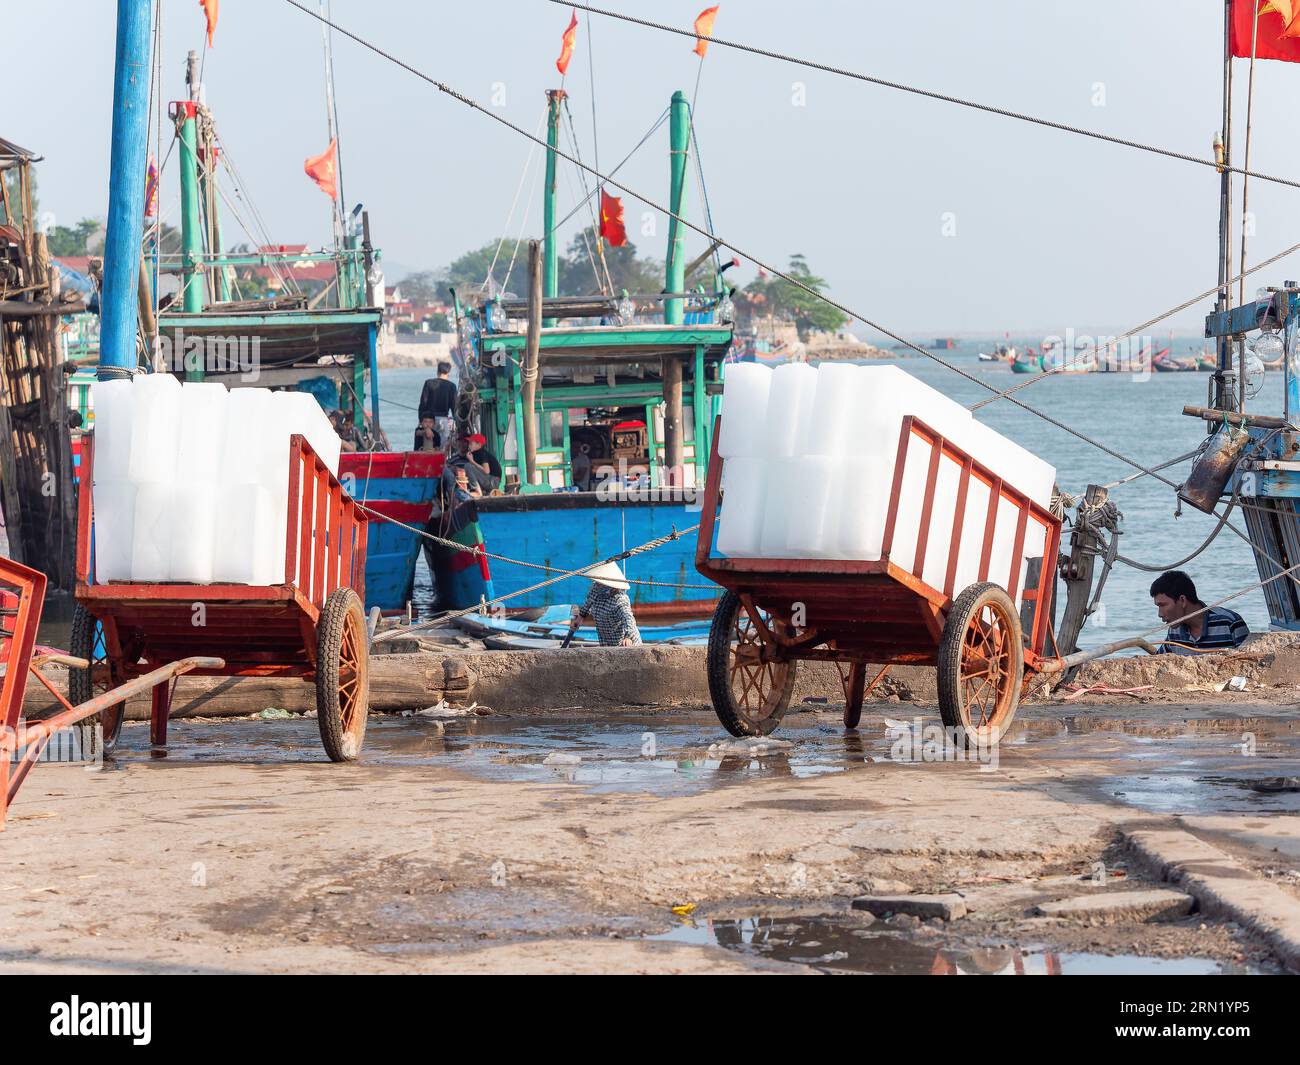 Ice blocks ready for delivery to fishing boats in Hai Thanh, a fishing village in the Thanh Hoa province of Vietnam. The Stock Photo